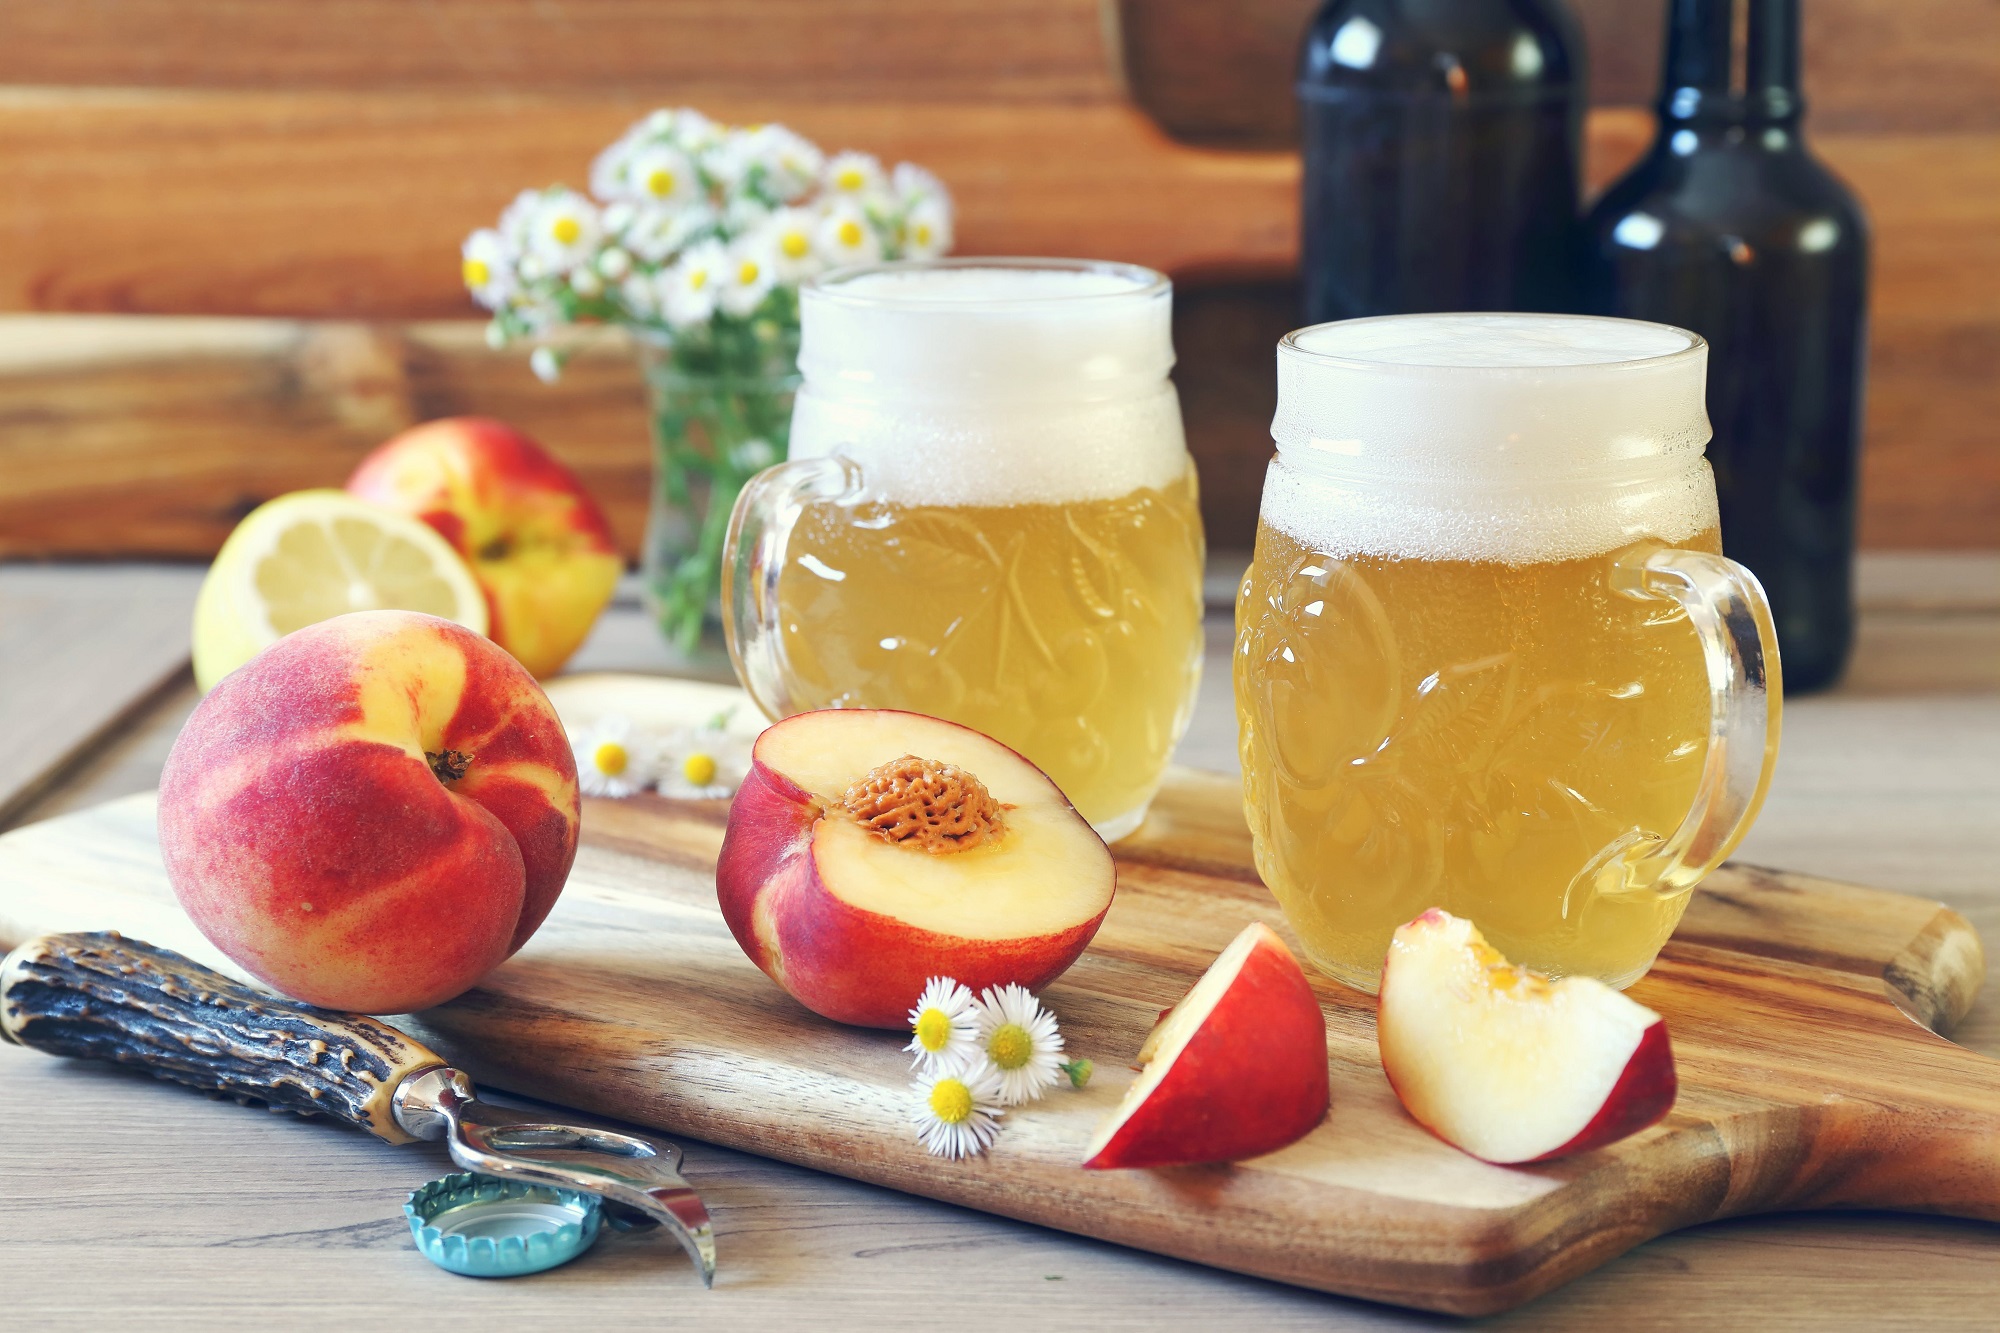 Peaches and Beer Steins